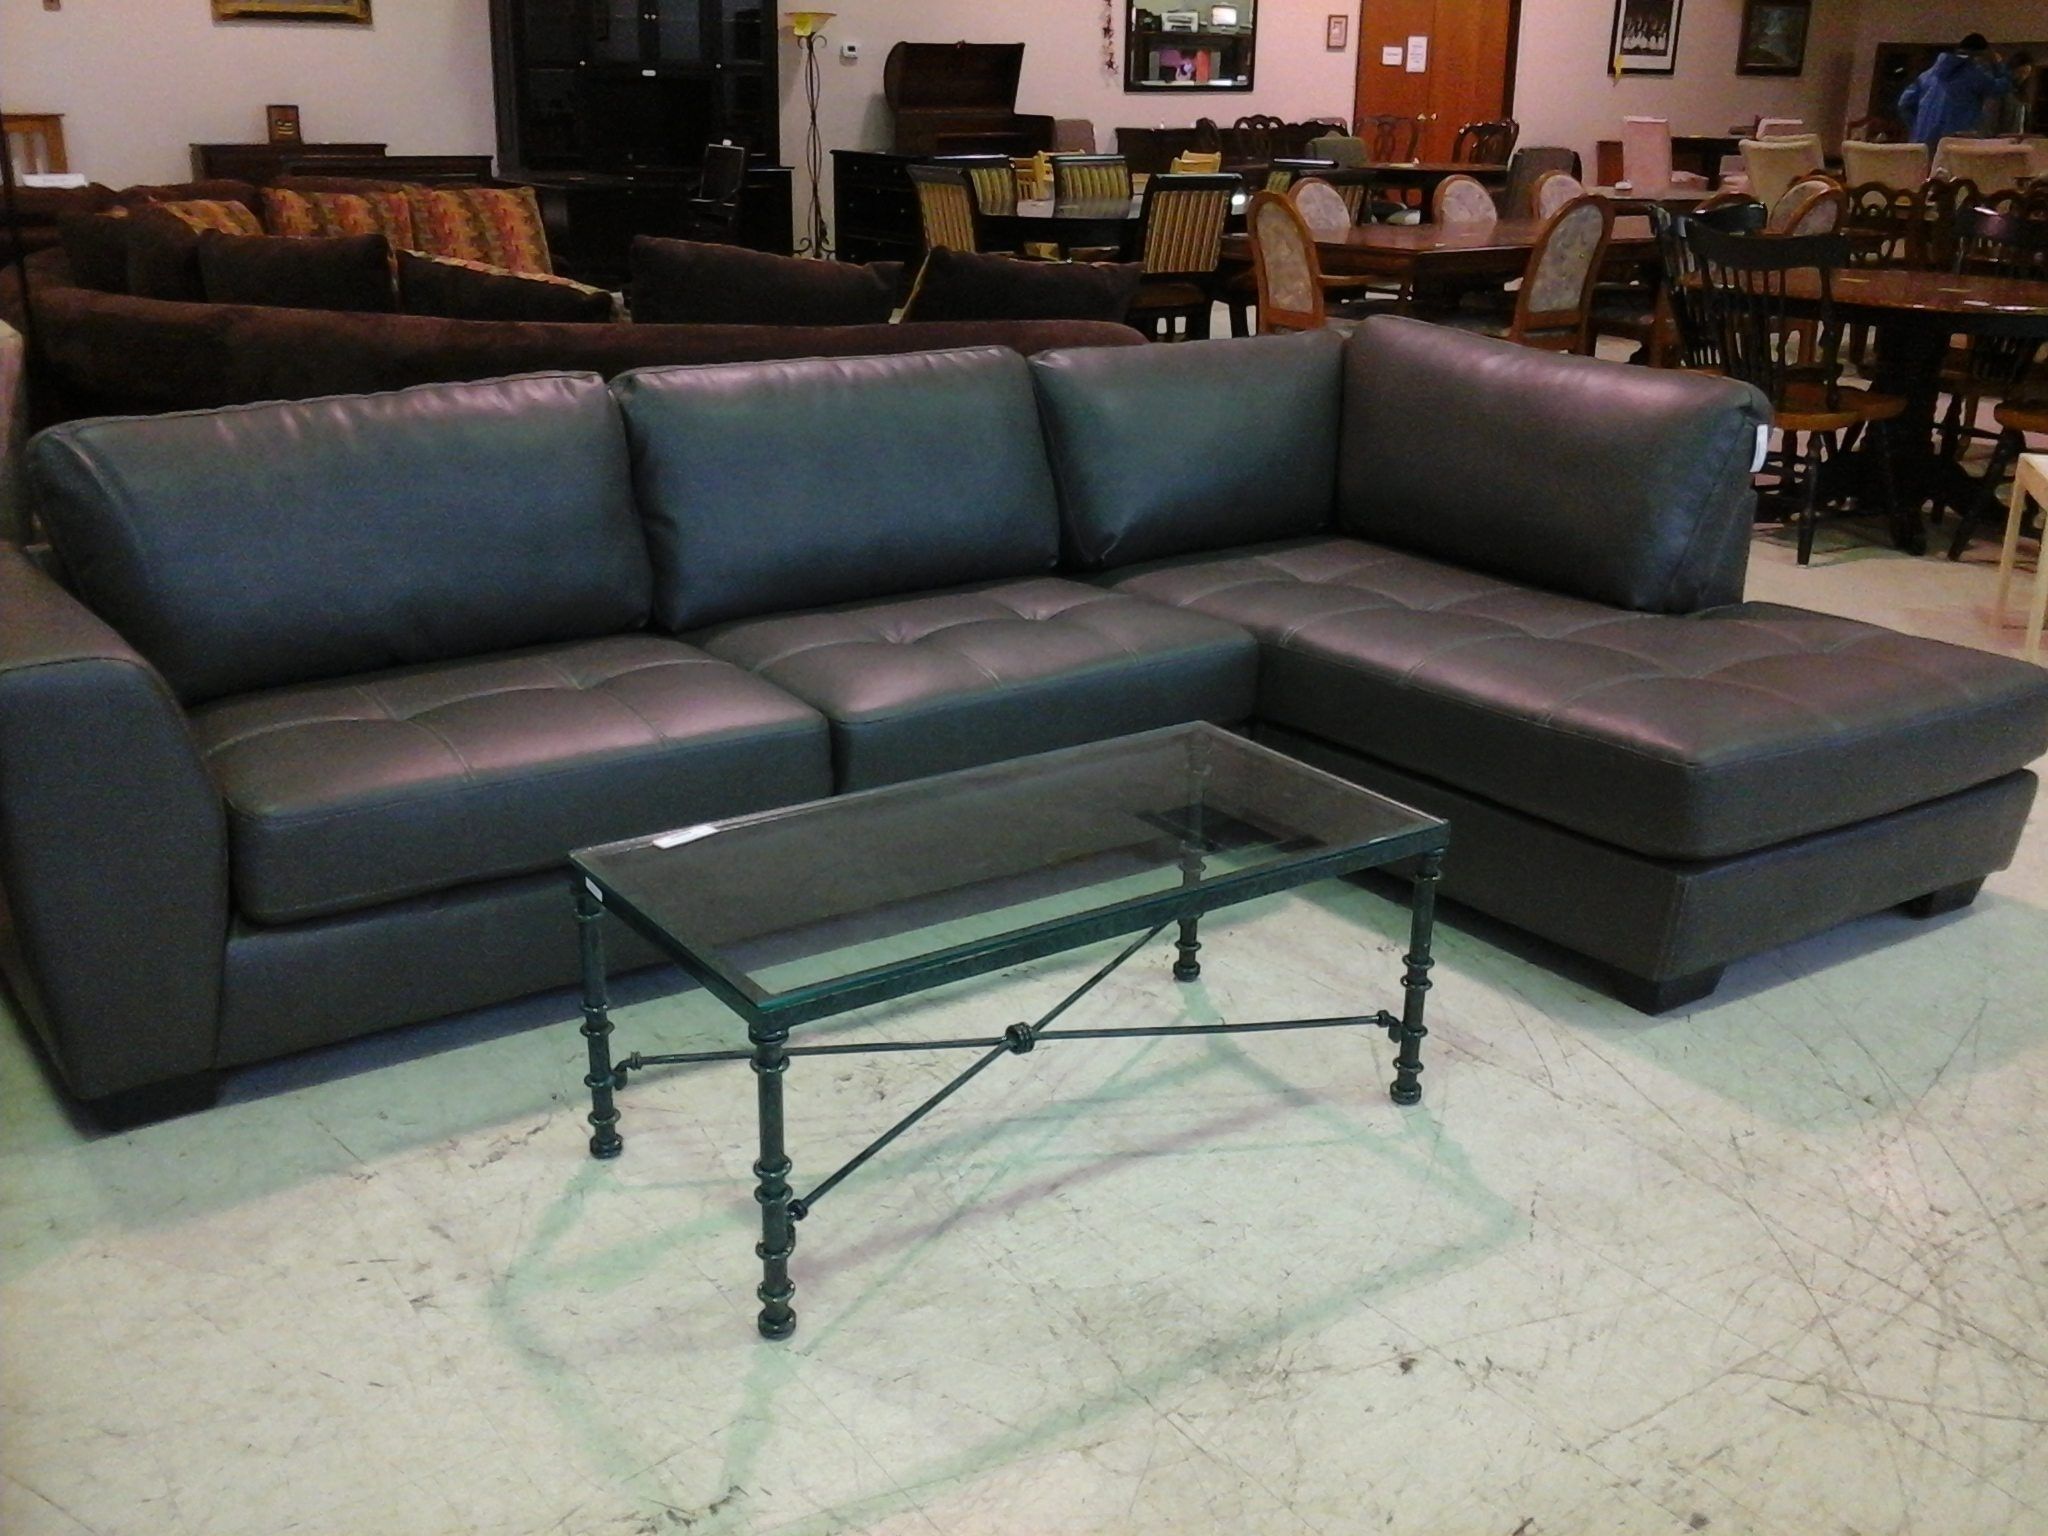 Raymour And Flanigan Leather Sofa | Aifaresidency Pertaining To Sectional Sofas At Raymour And Flanigan (View 10 of 10)